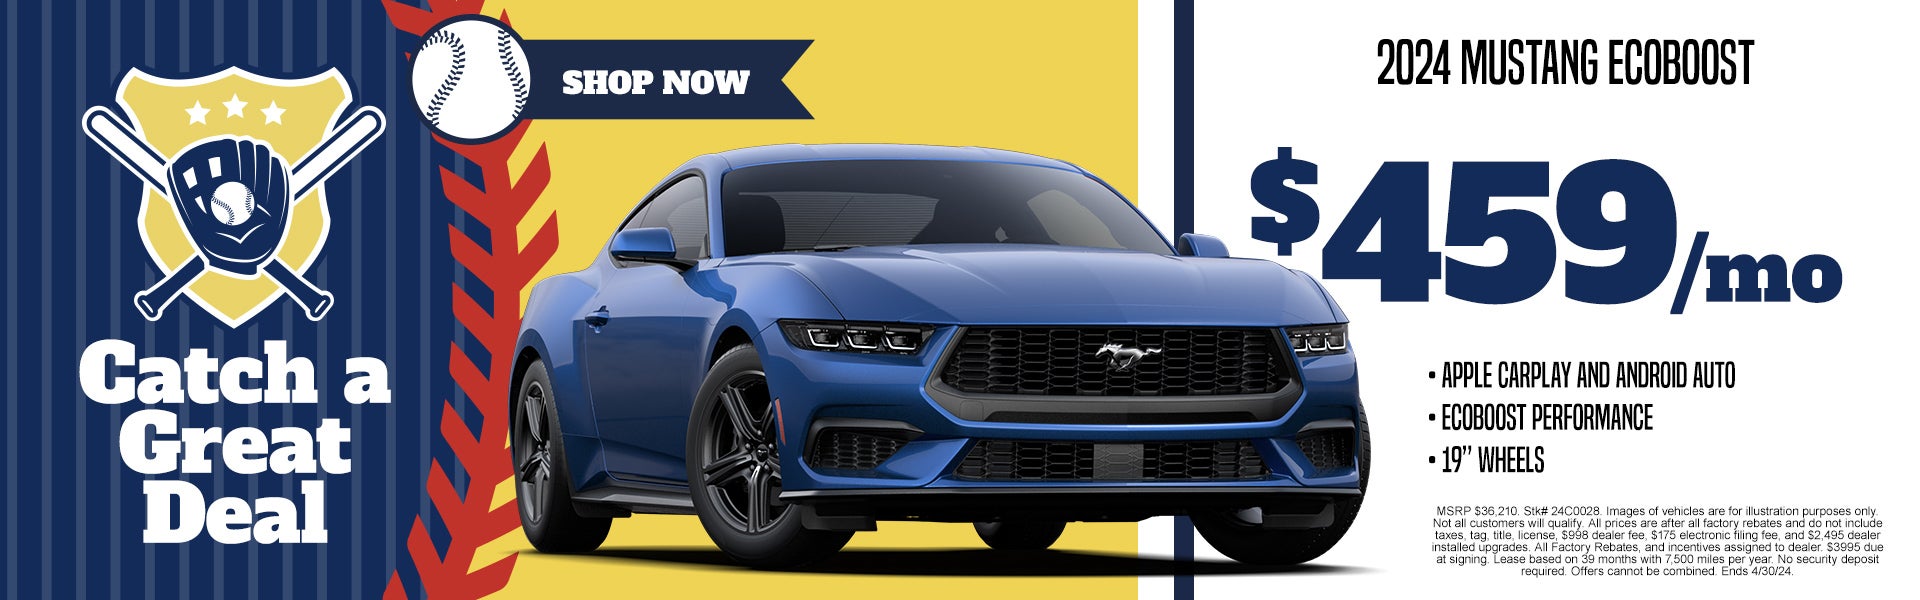 2024 Mustang EcoBoost $459/mo